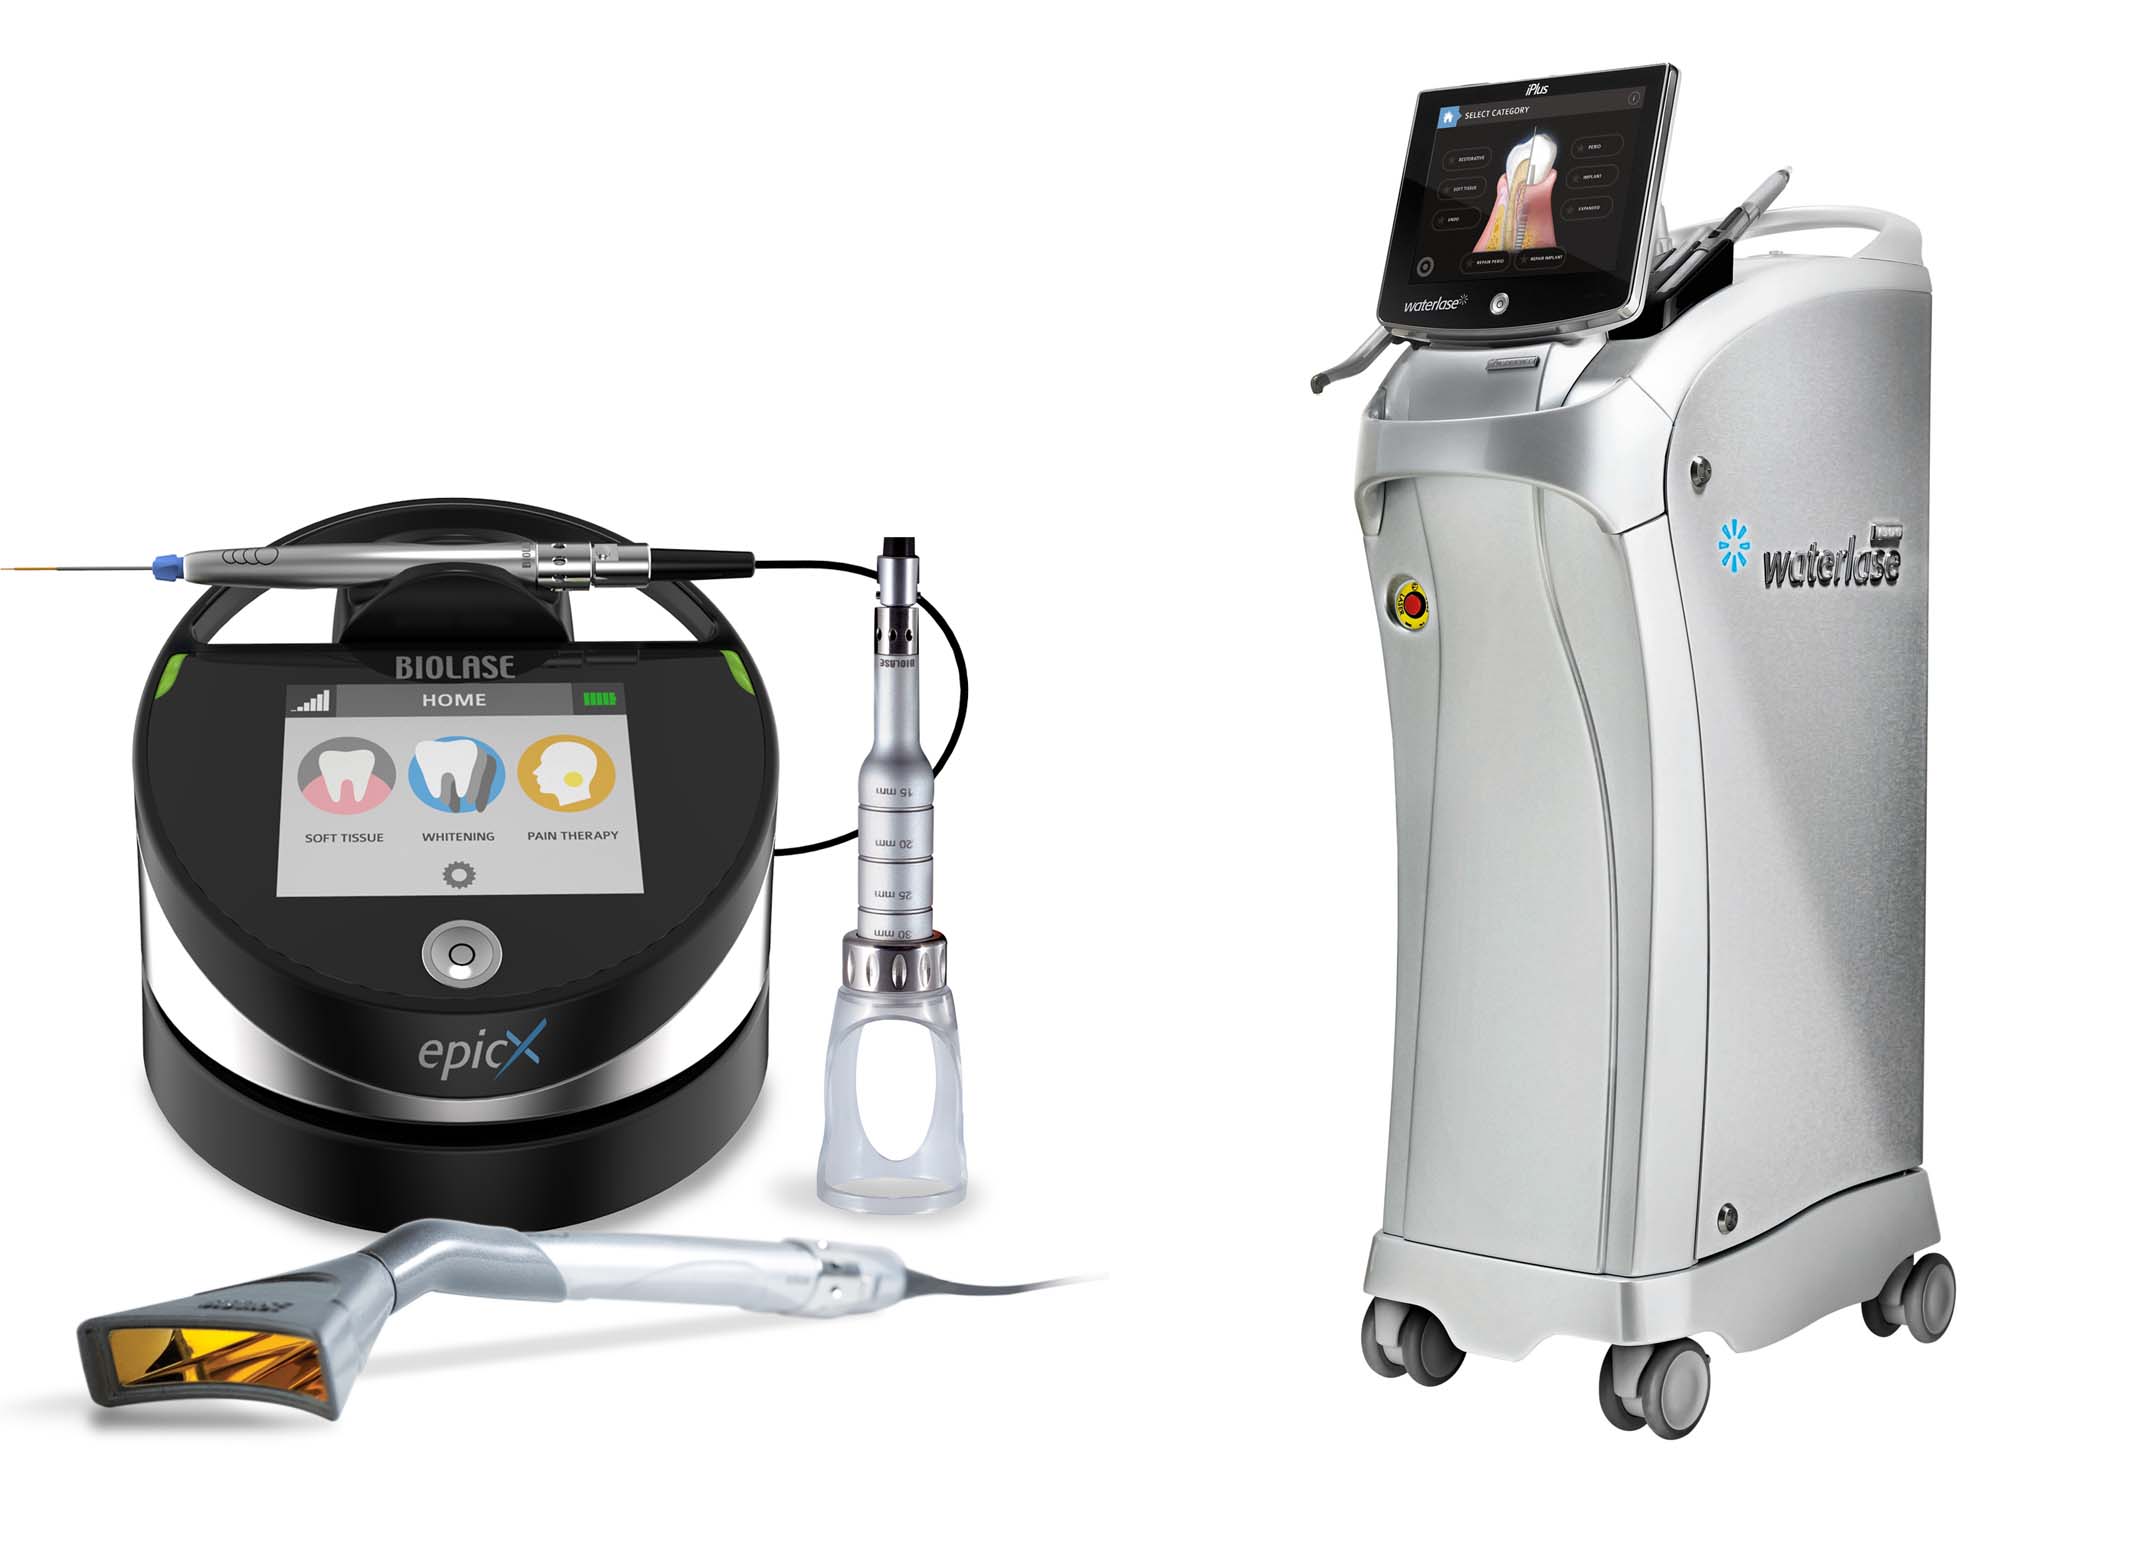 WaterLase iPlus All-Tissue Laser and EPIC X Diode Receive Industry Awards